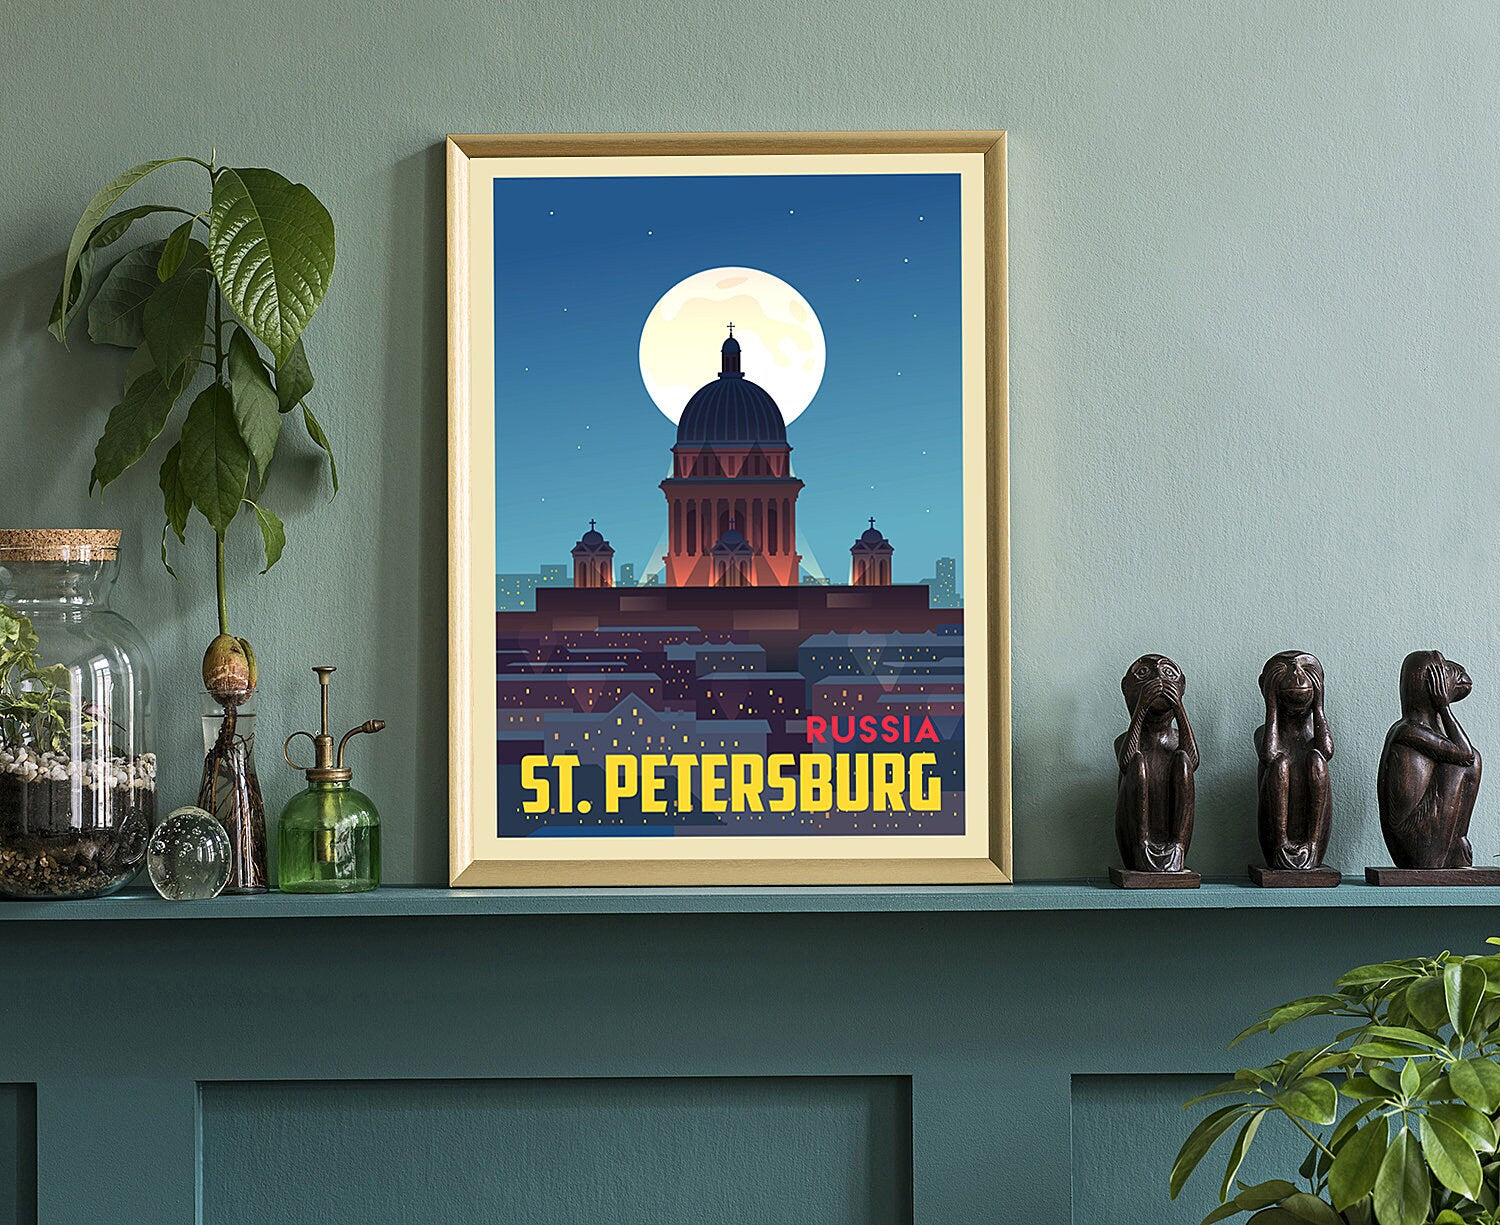 Retro Style Travel Poster, Russia ST Petersburg Vintage Rustic Poster Print, Home Wall Art, Office Wall Decors, Posters, State Map Poster